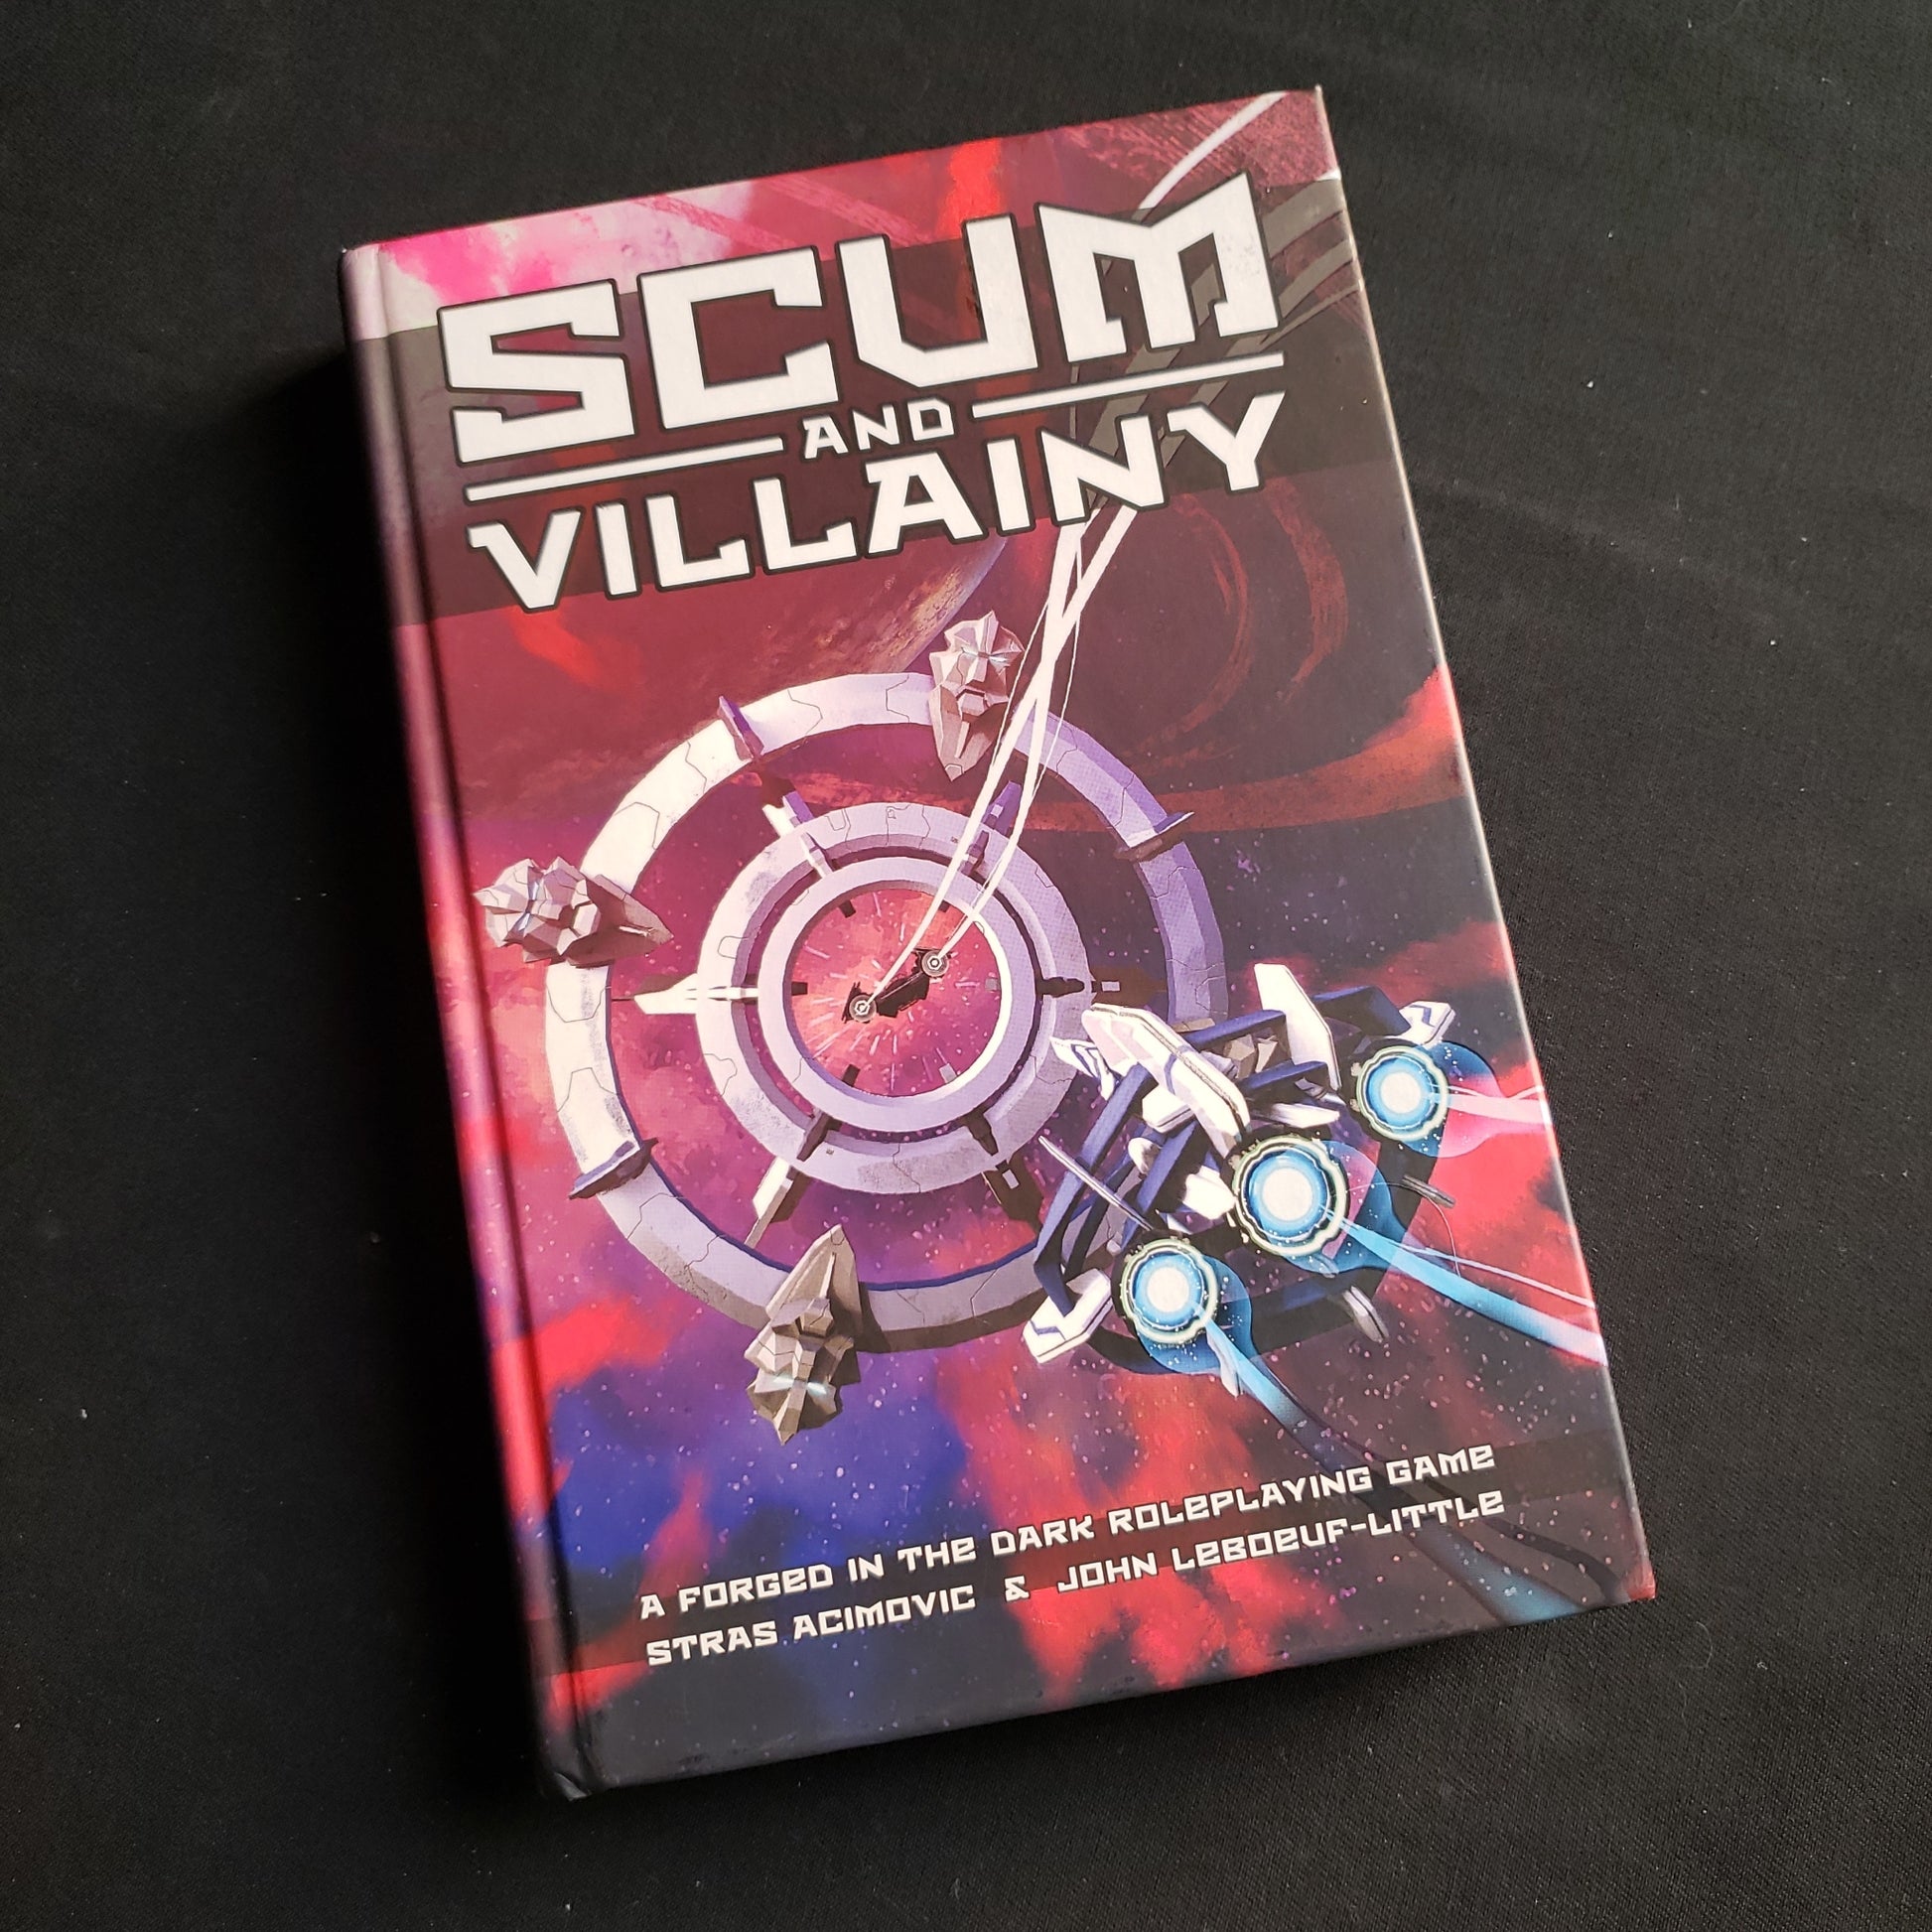 Image shows the front cover of the Scum & Villainy roleplaying game book